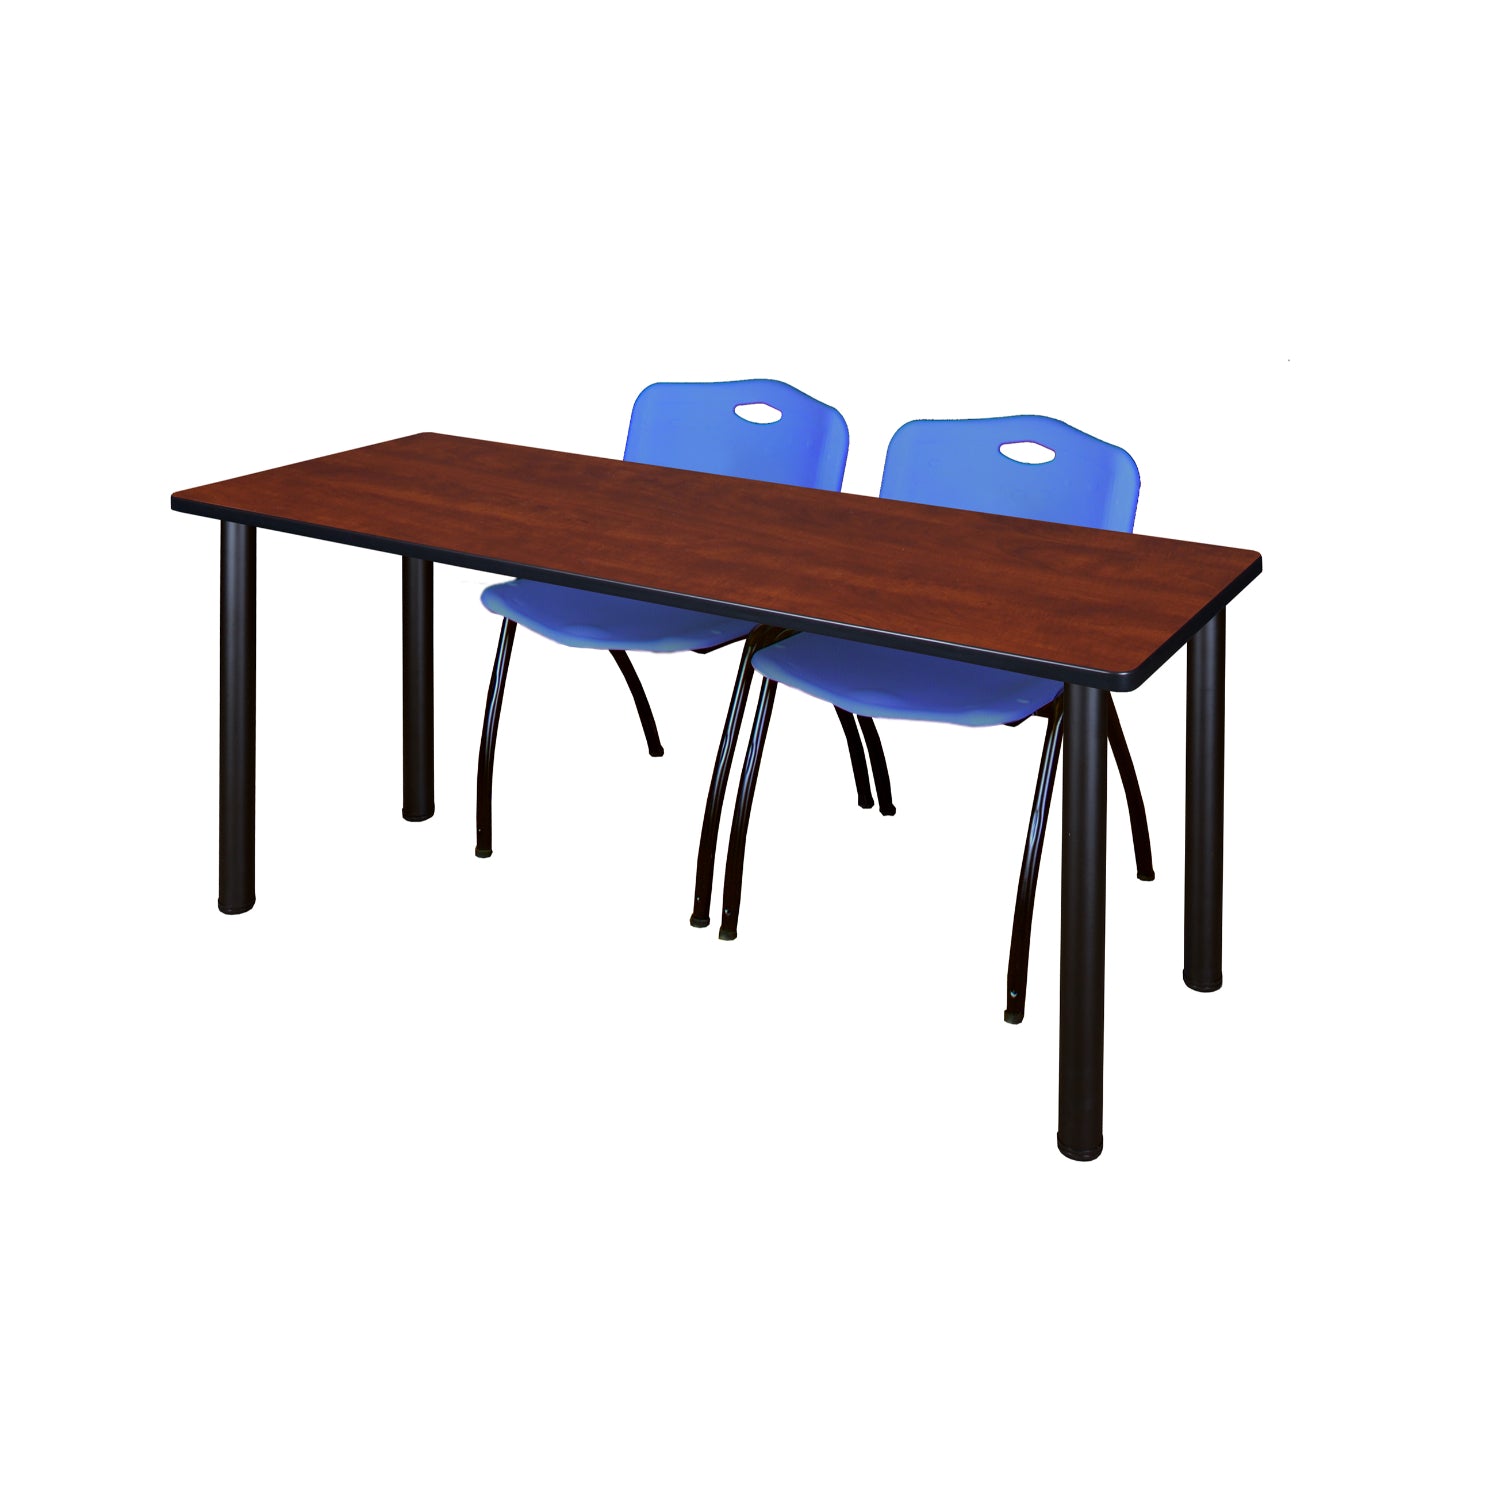 Kee Training Table and Chair Package, Kee 72" x 24" Post Leg Training/Seminar Table with 2 "M" Stack Chairs